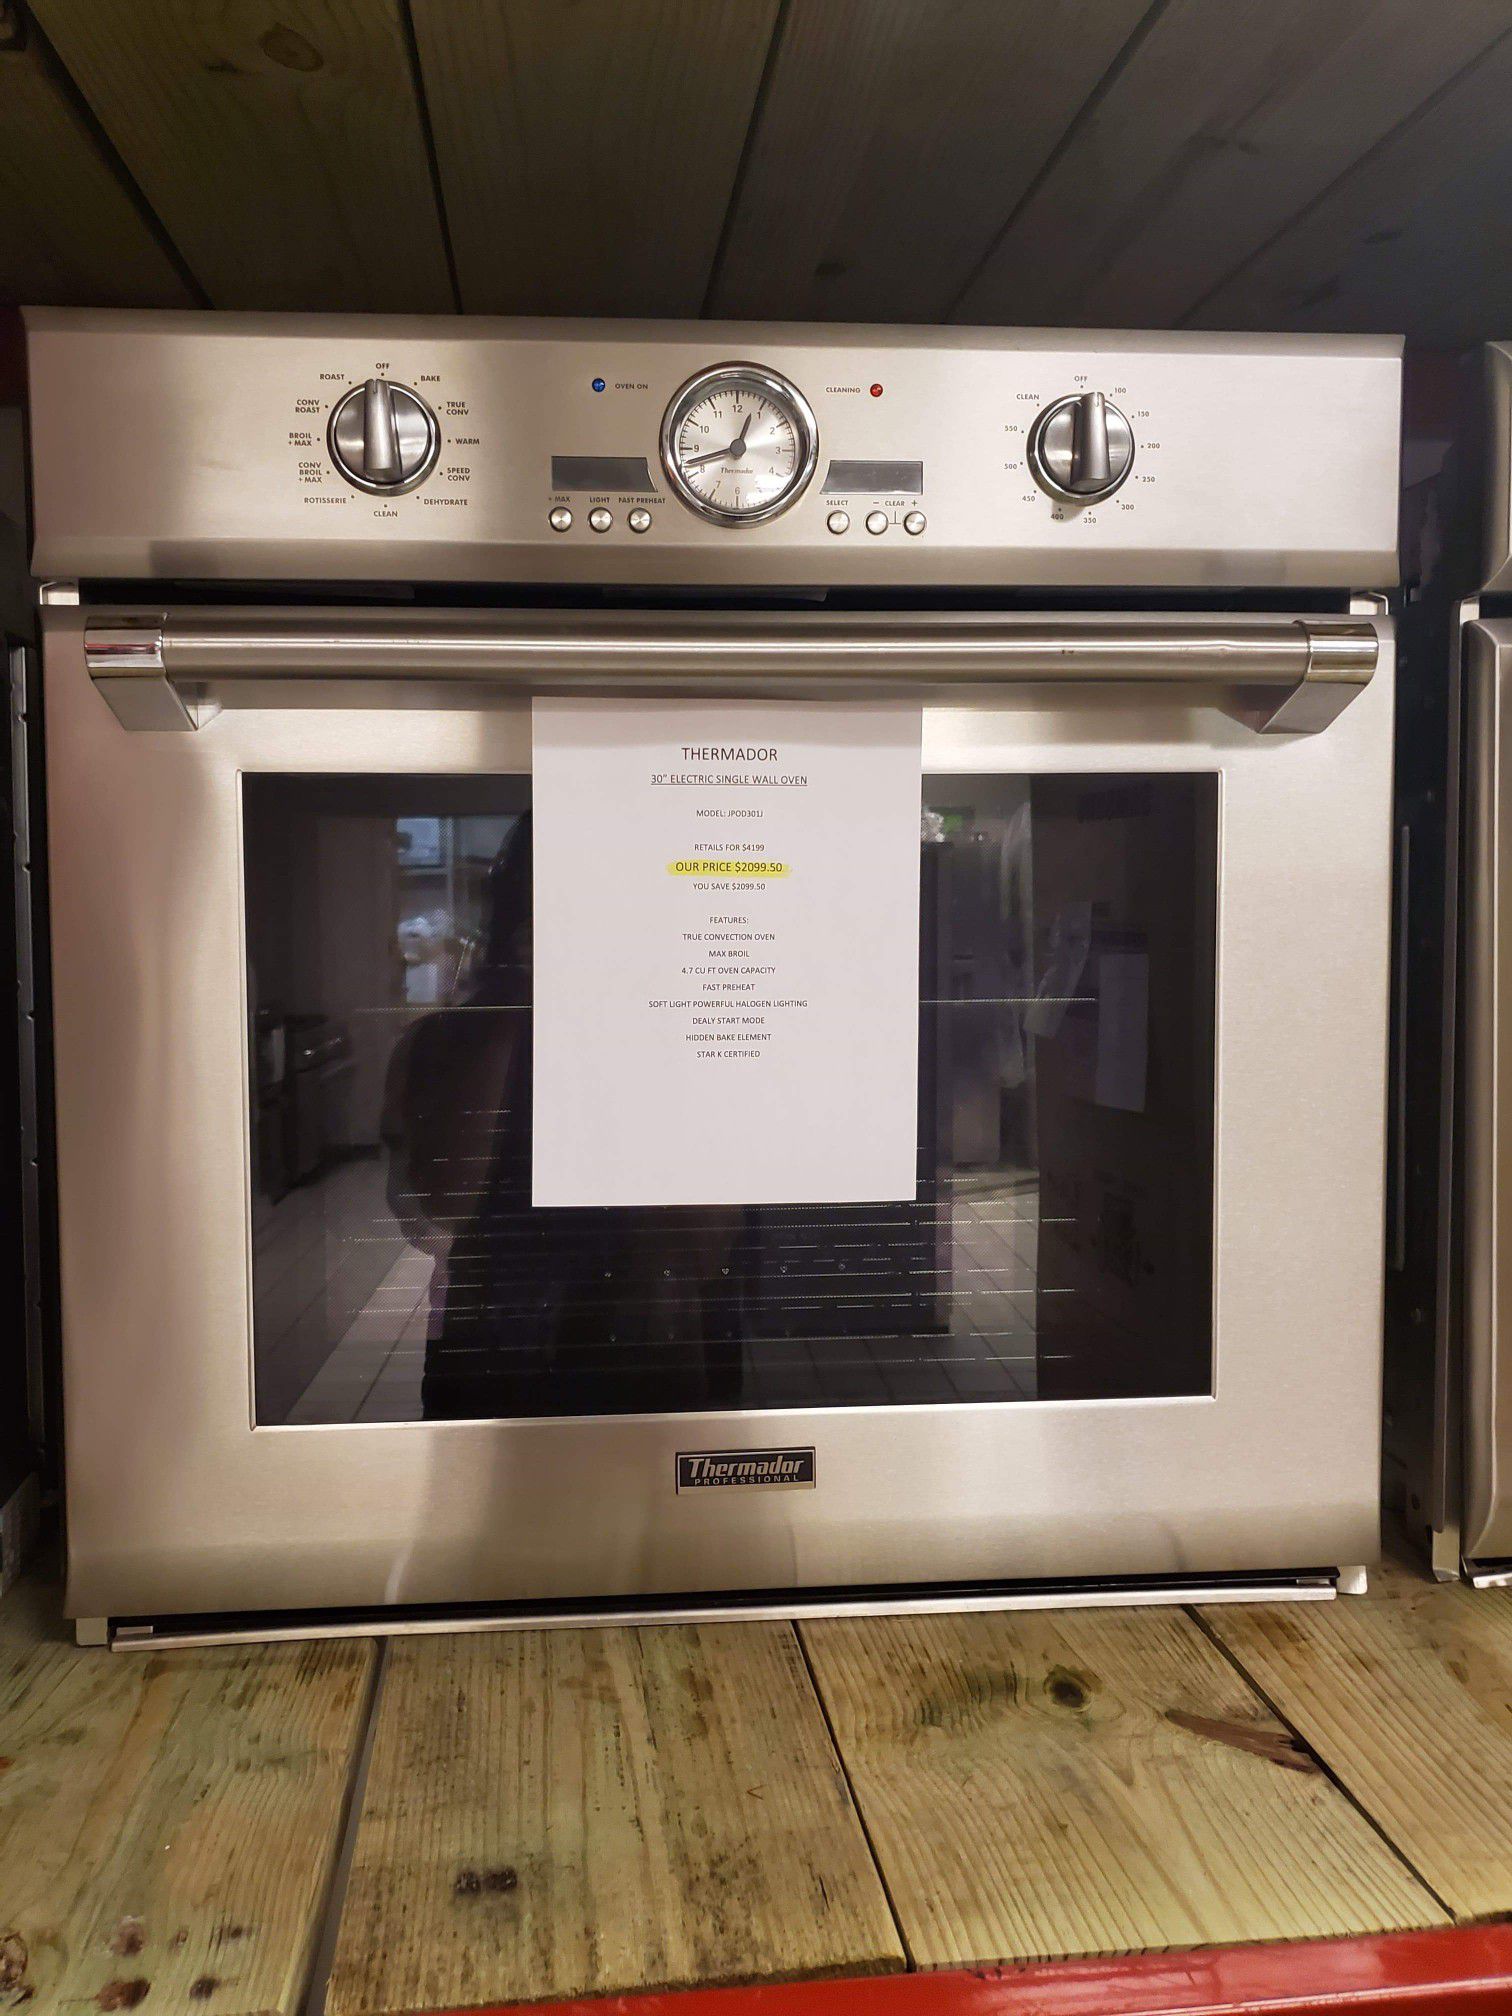 THERMADOR 30" ELECTRIC SINGLE WALL OVEN